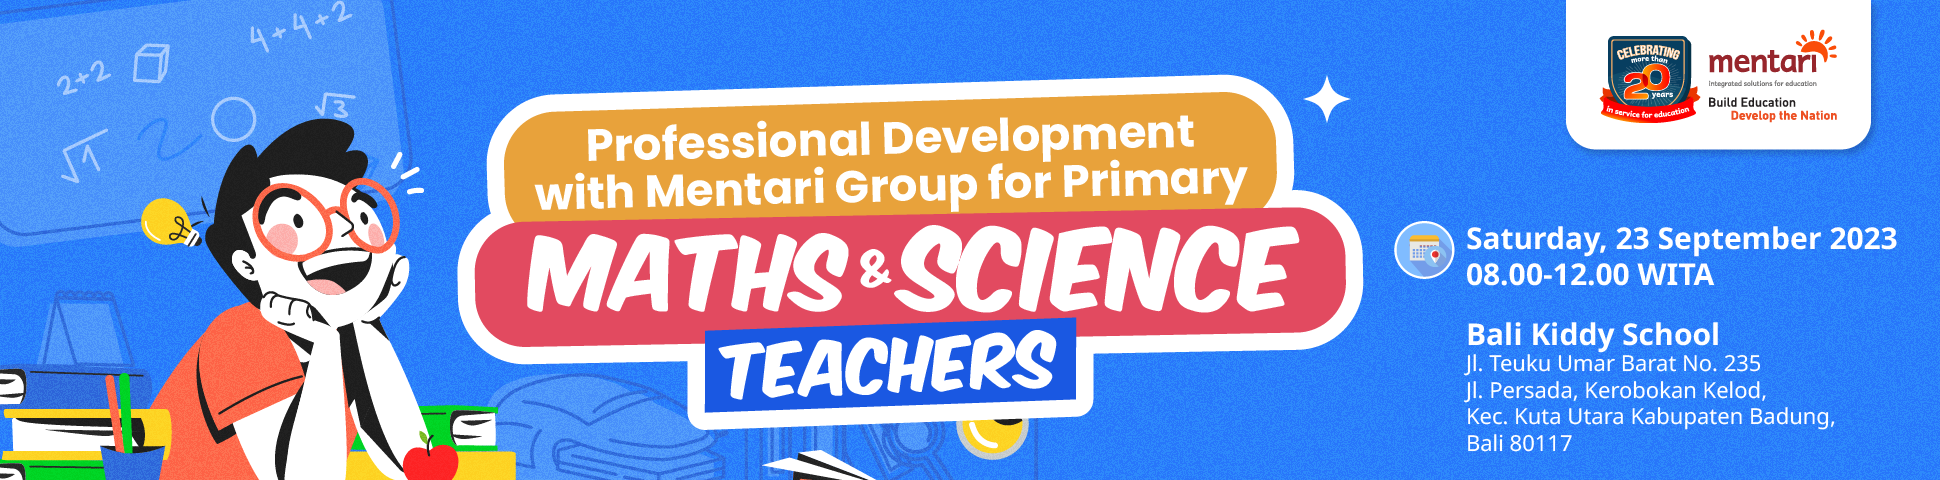 Professional Development Training for Primary Maths and Science Teachers - BALI